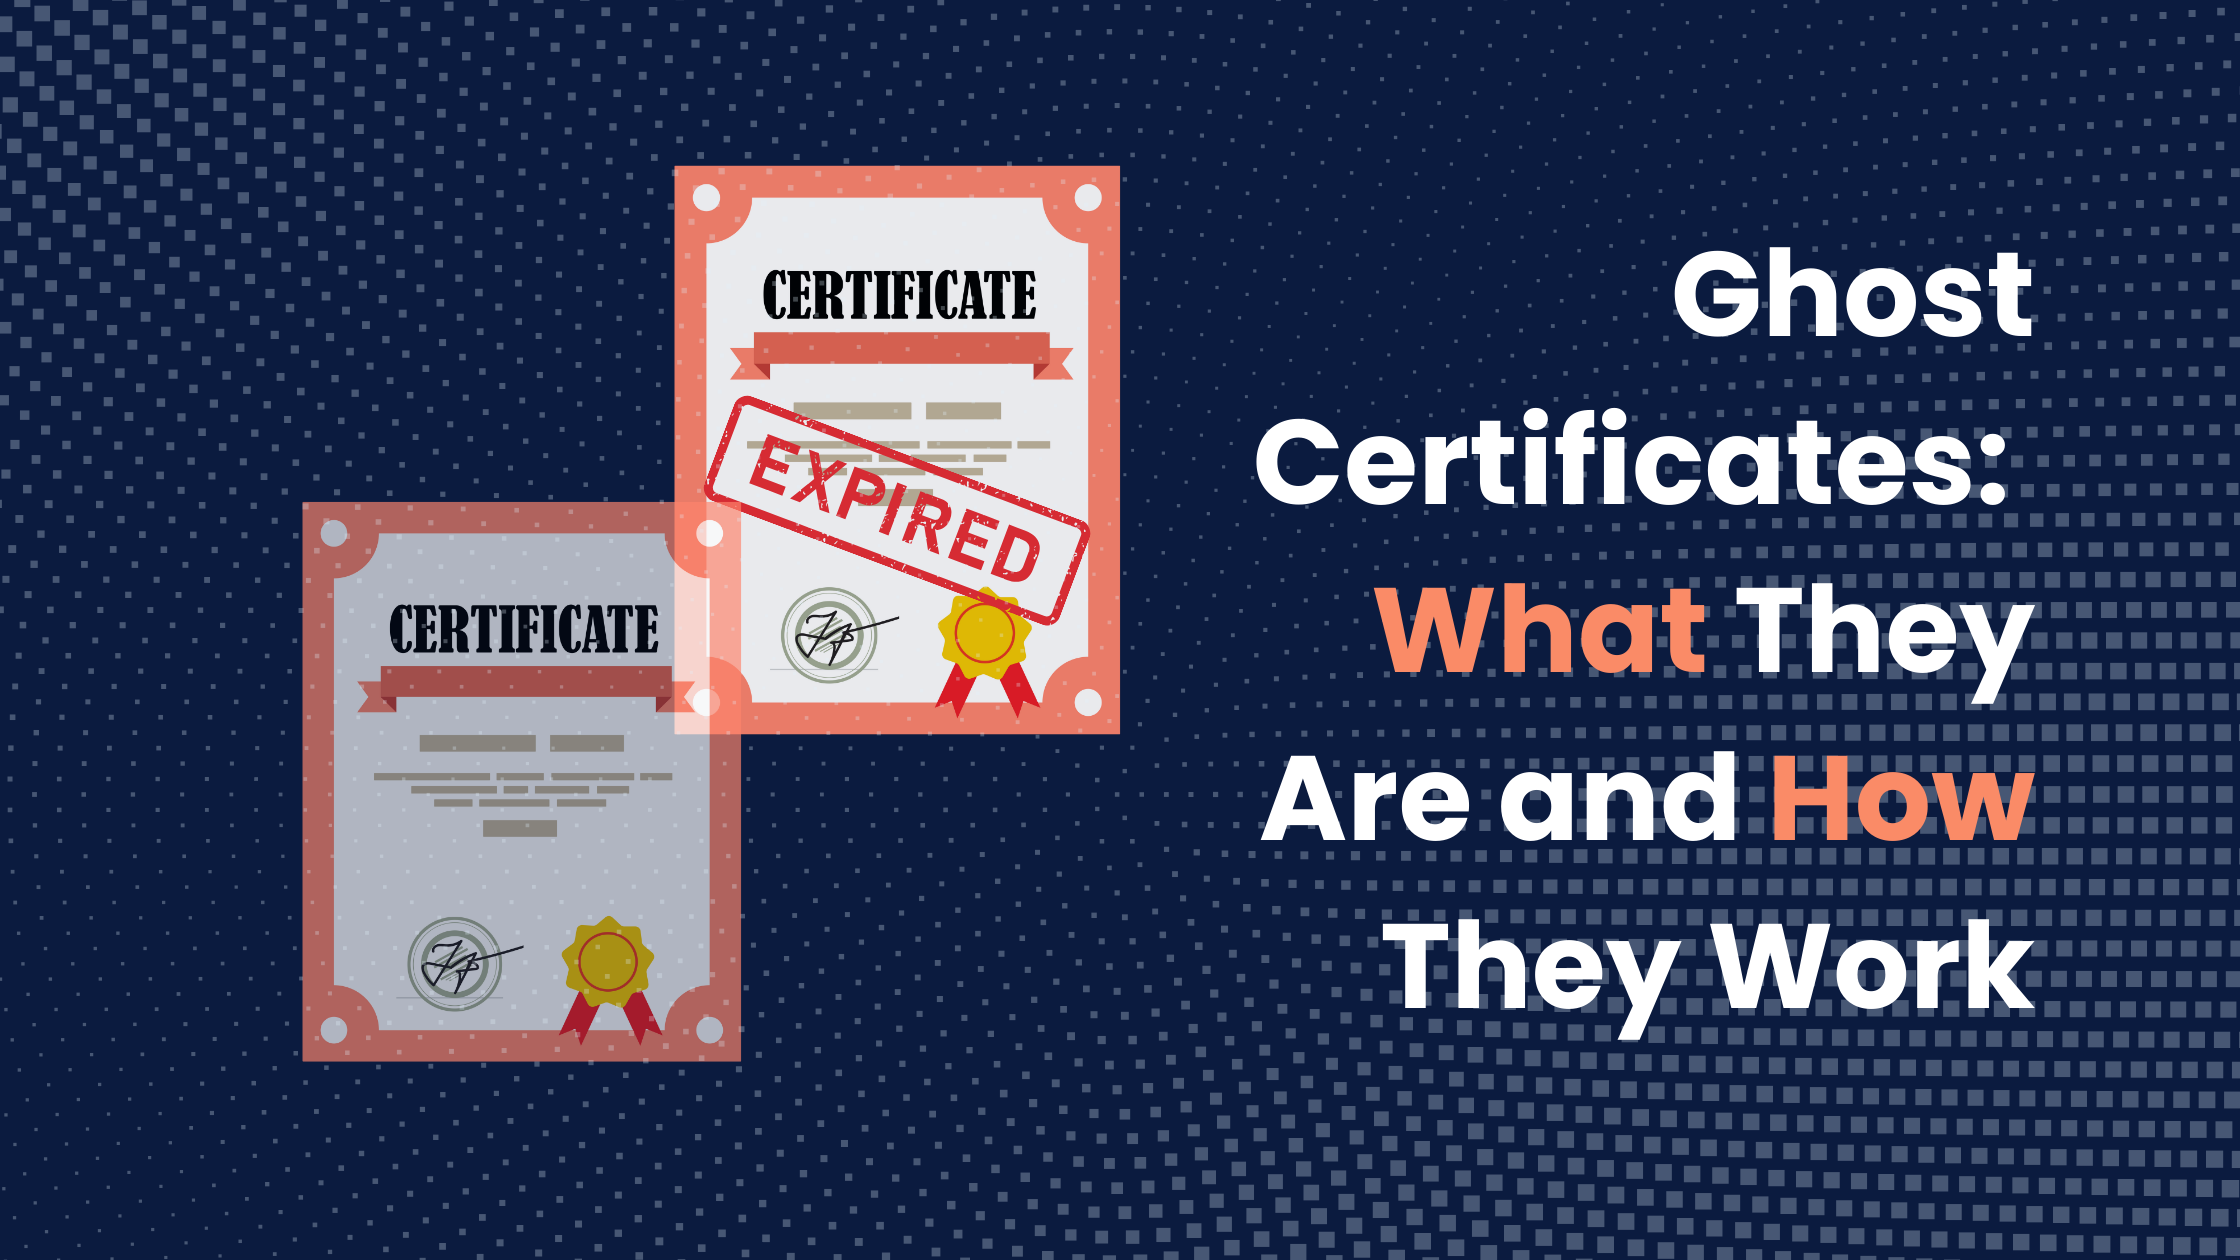 Ghost Certificates: What They Are and How They Work